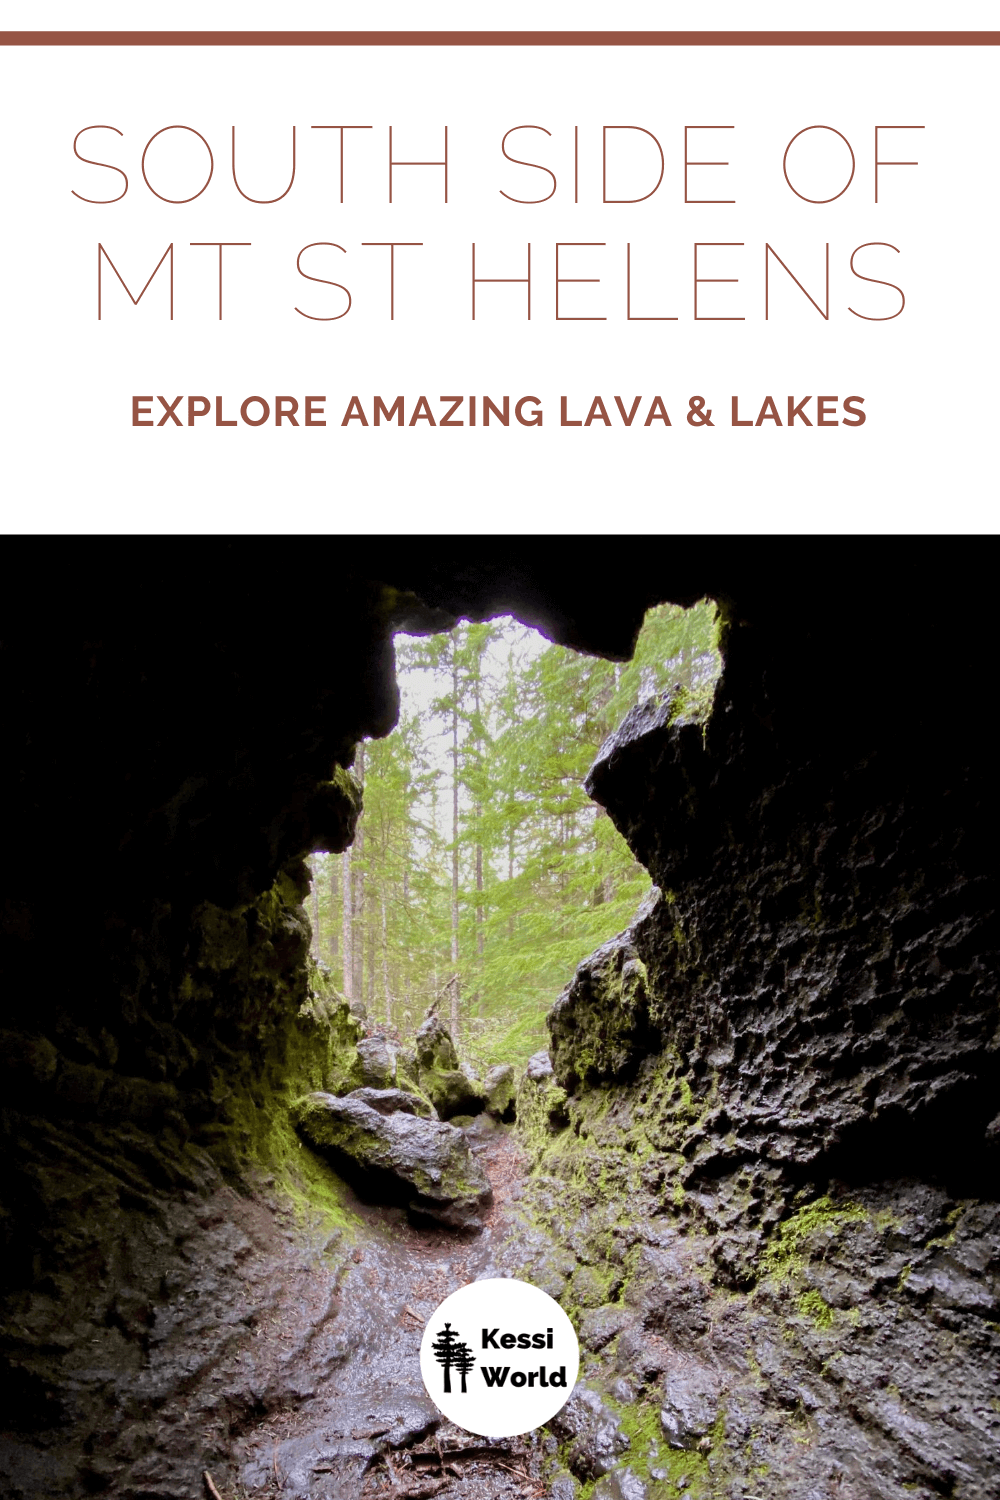 A great activity on a visit to Mount St. Helens is a lava tube created by a tree. This is an iron ladder leading into a round hole made from a tree covered in lava that burned out many thousands of years ago. It is dark in the tube, which is surrounded by lime green moss.